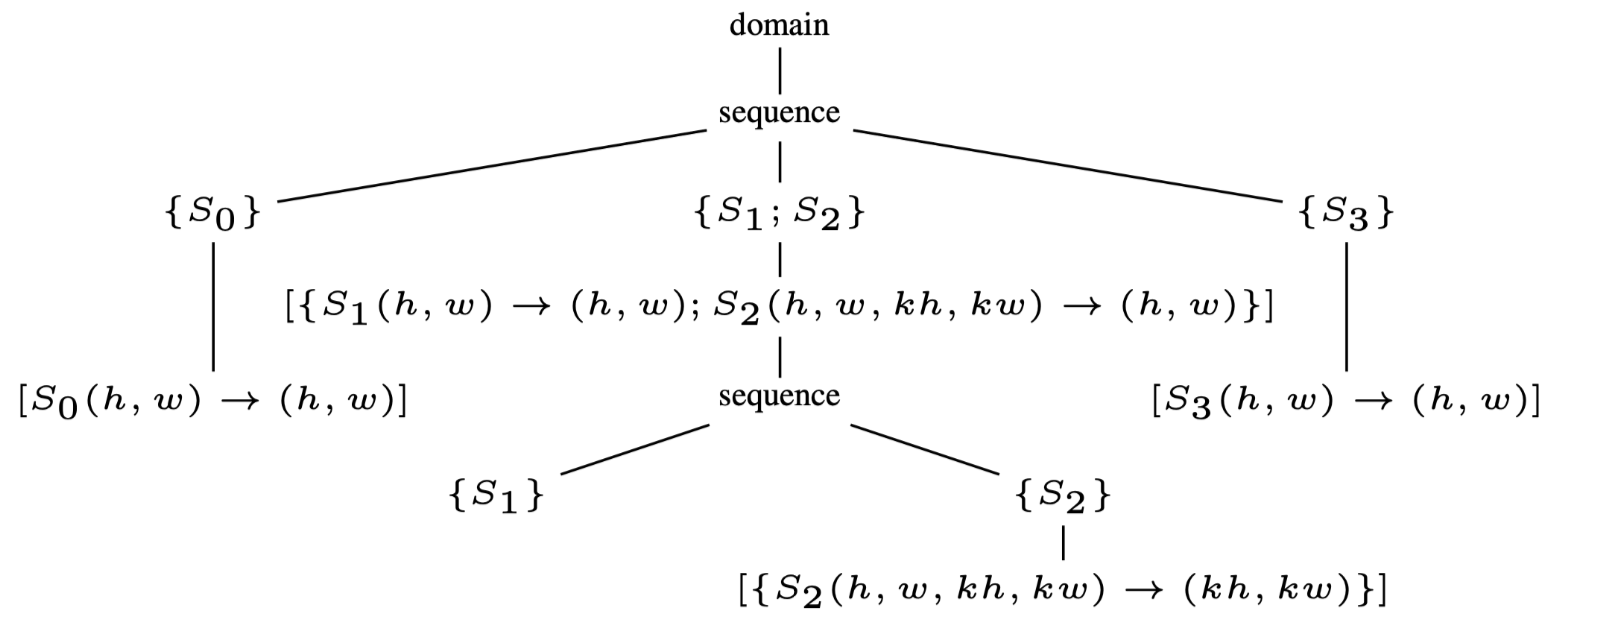 Fig.2(a): The initial schedule tree